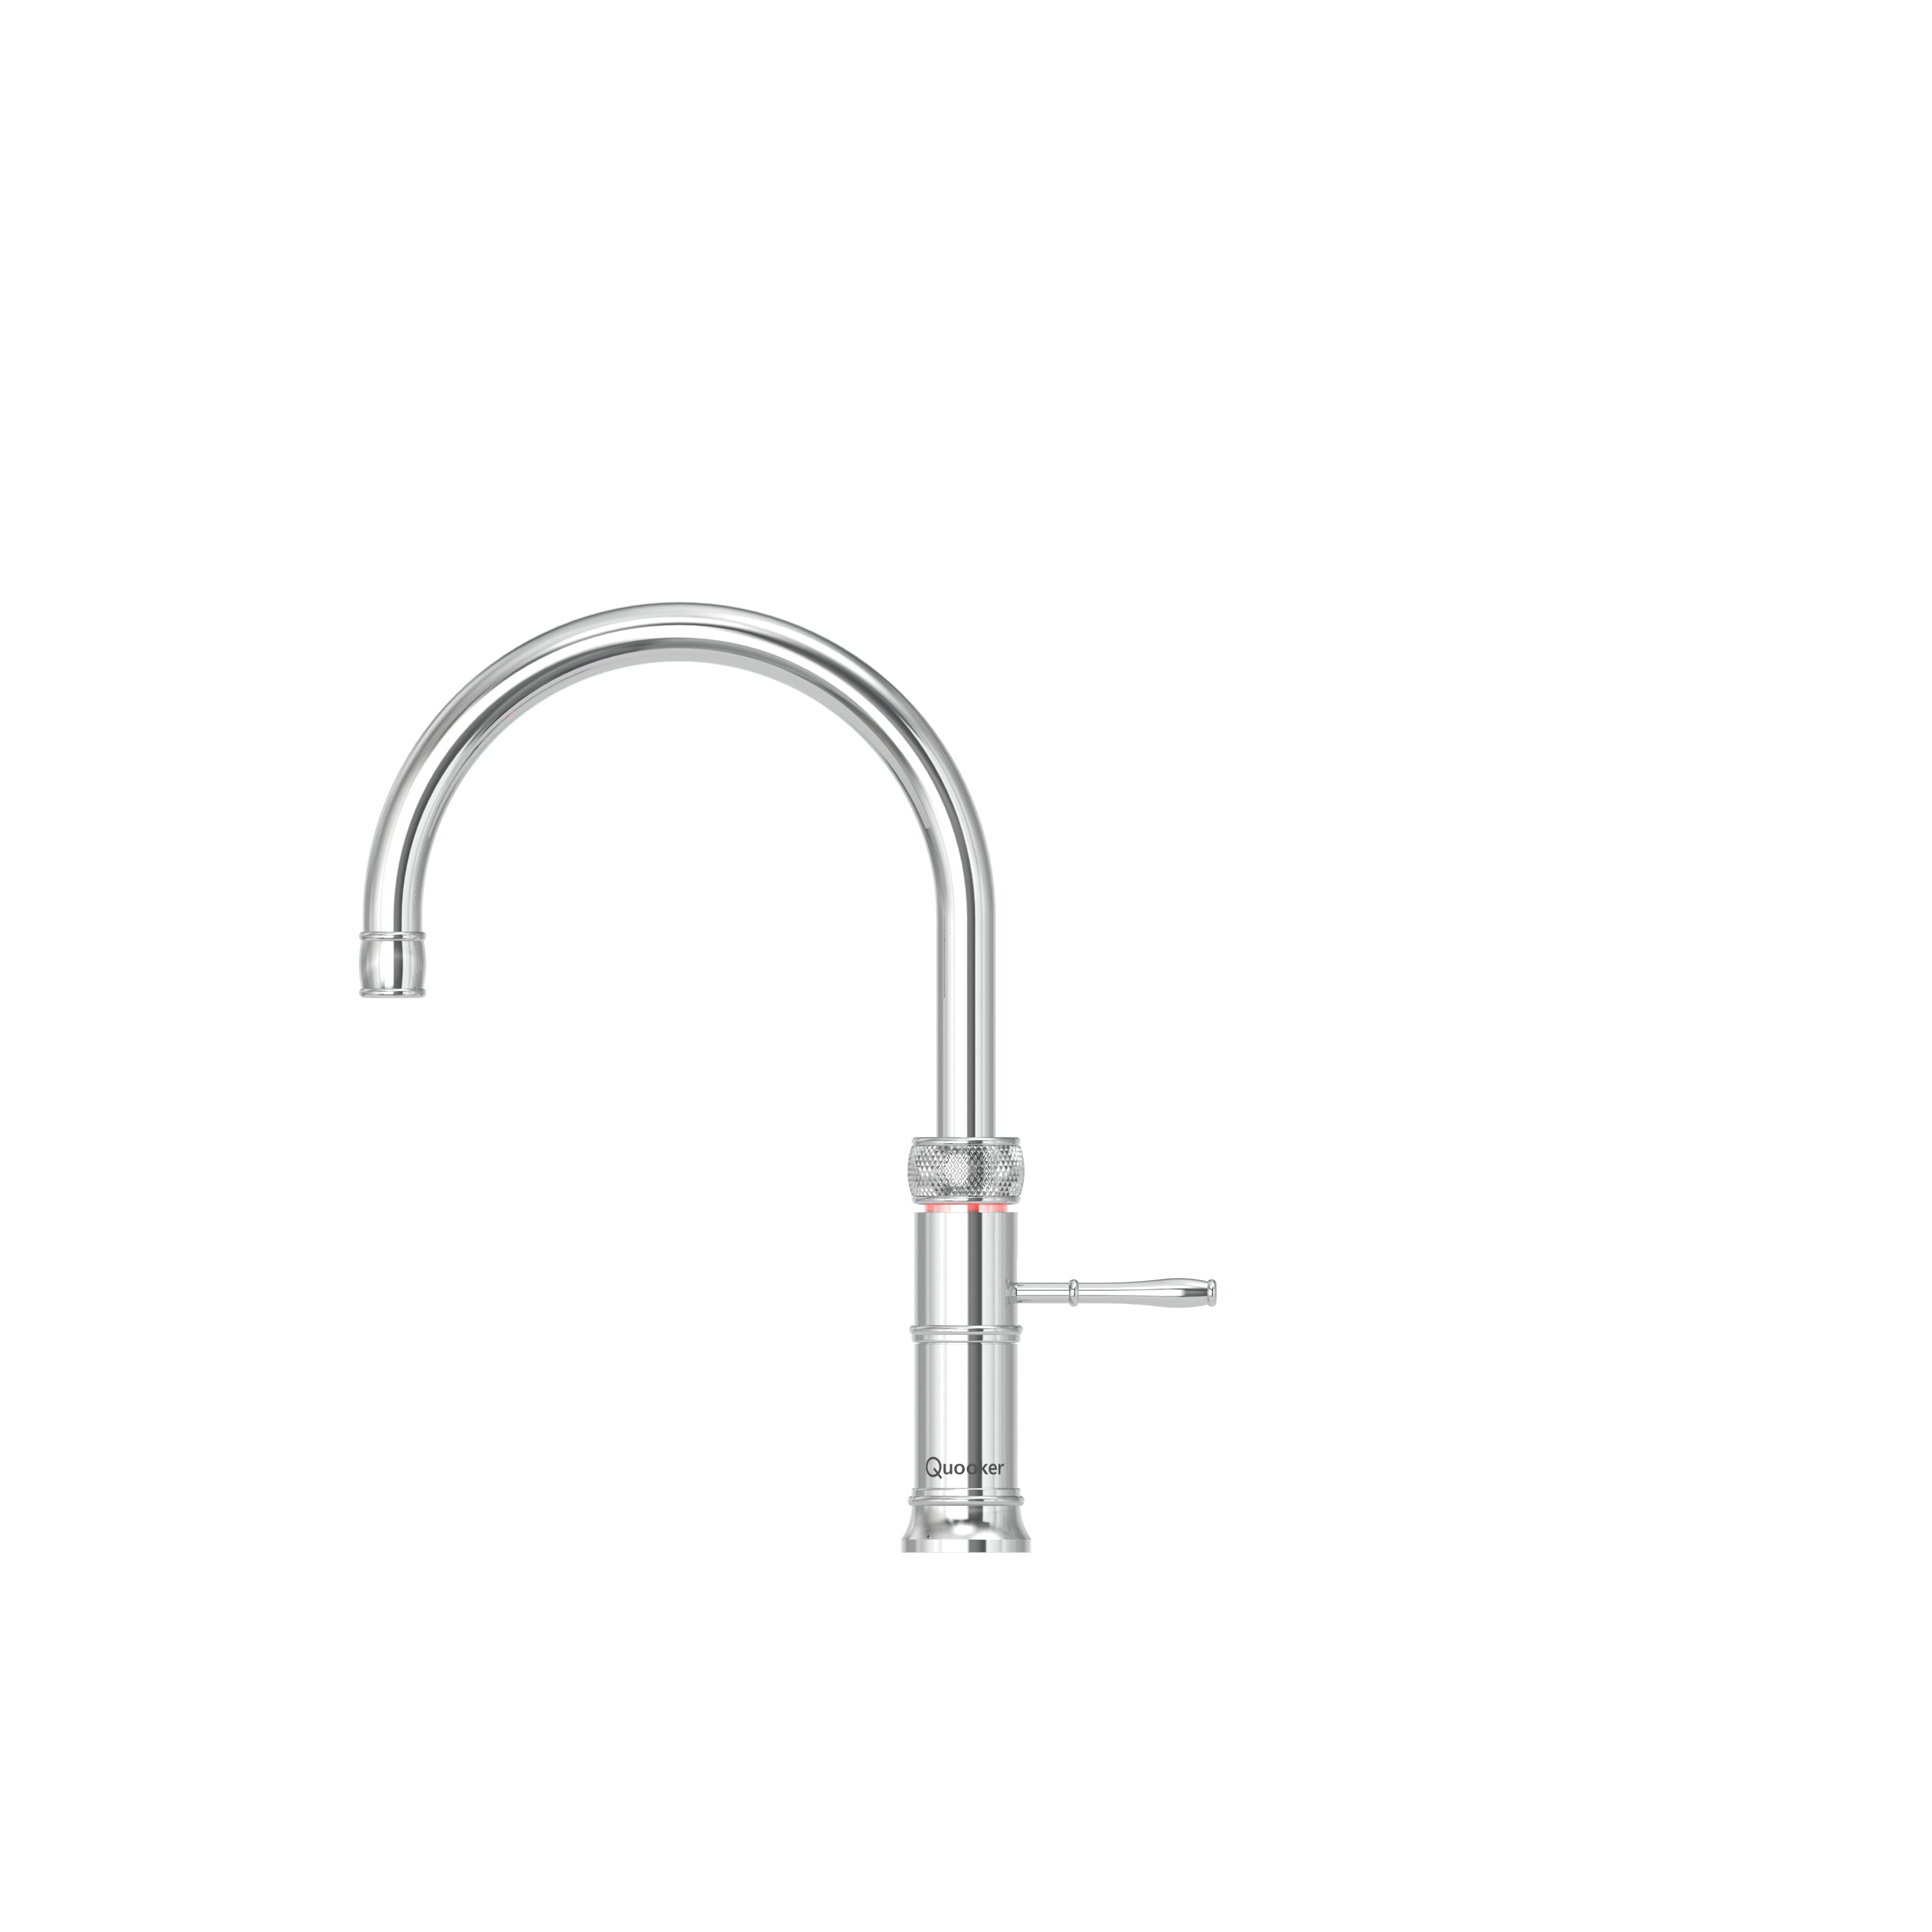 Quooker Classic Fusion Round Tap finished in chrome.